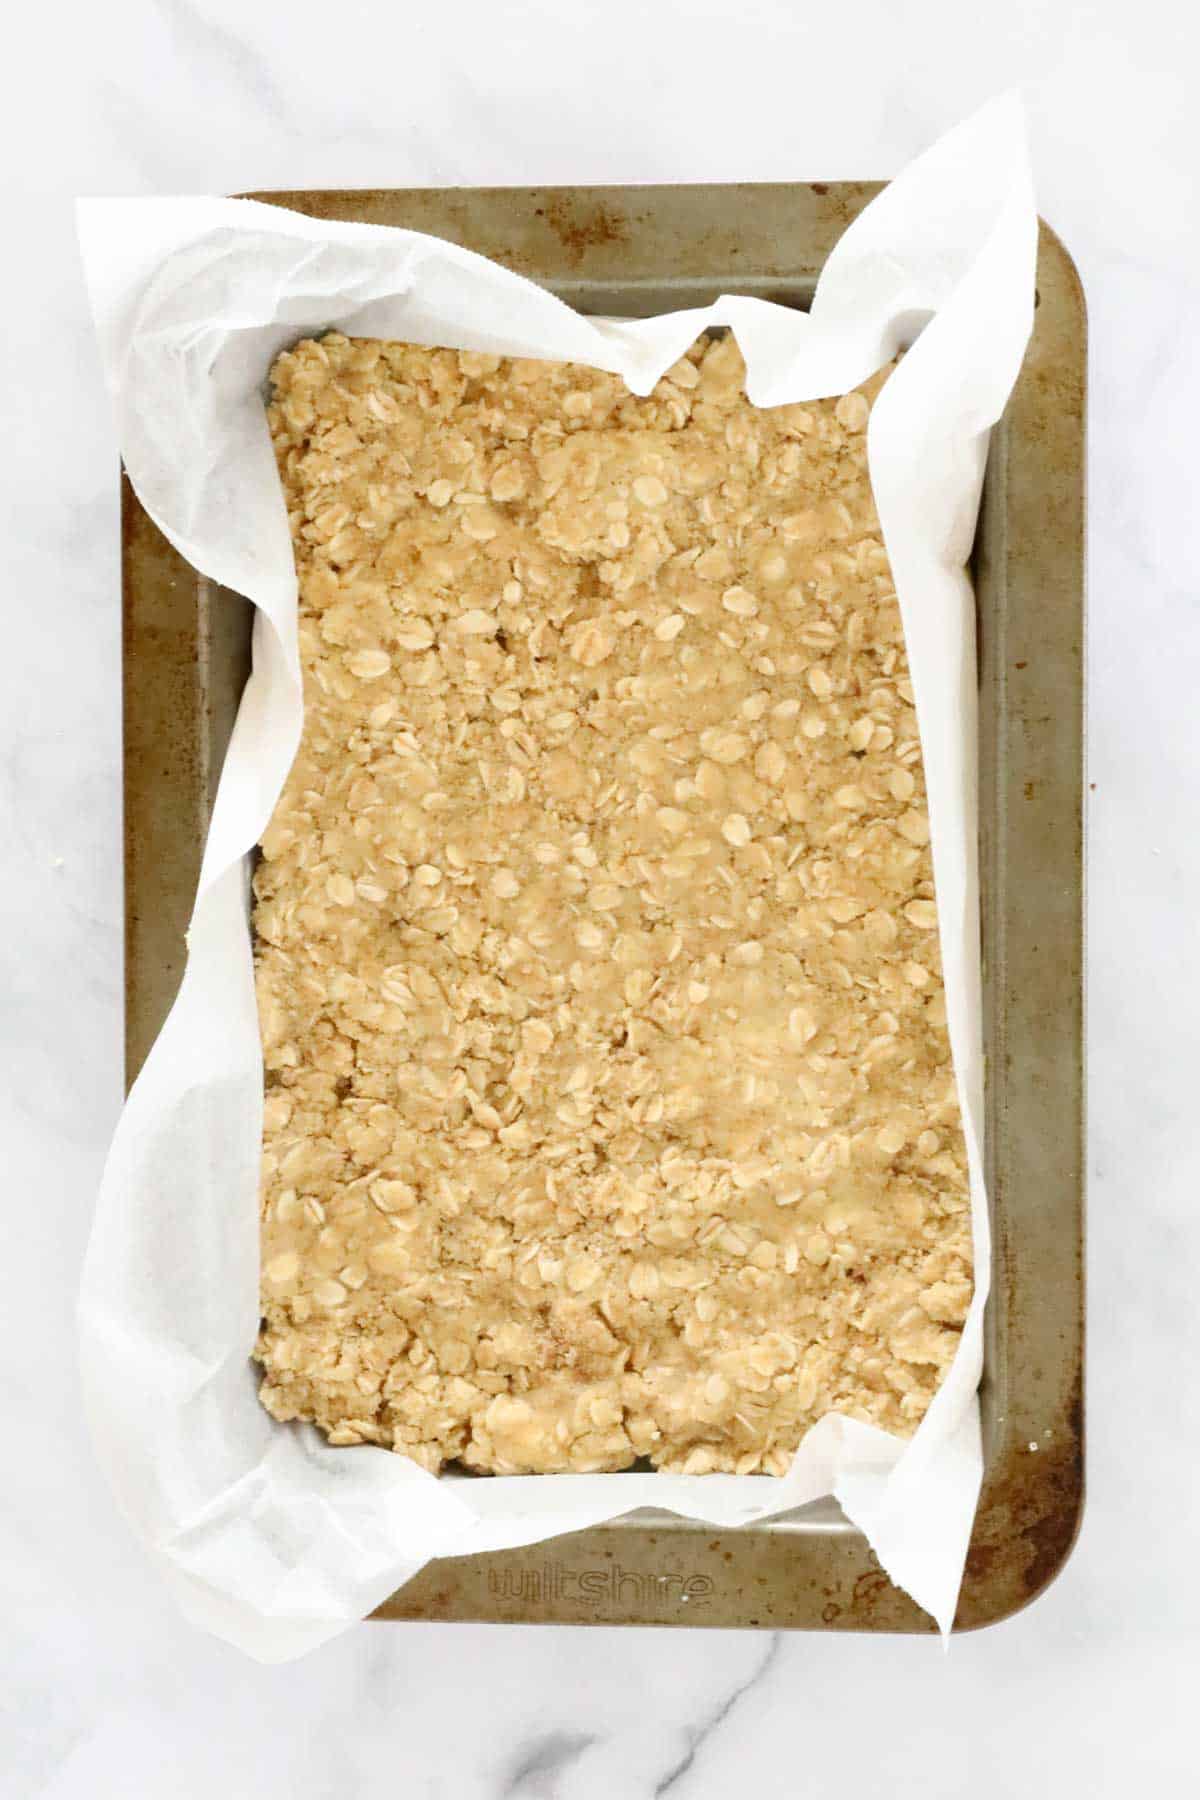 Half the crumble mix pressed into a paper lined slice tray.